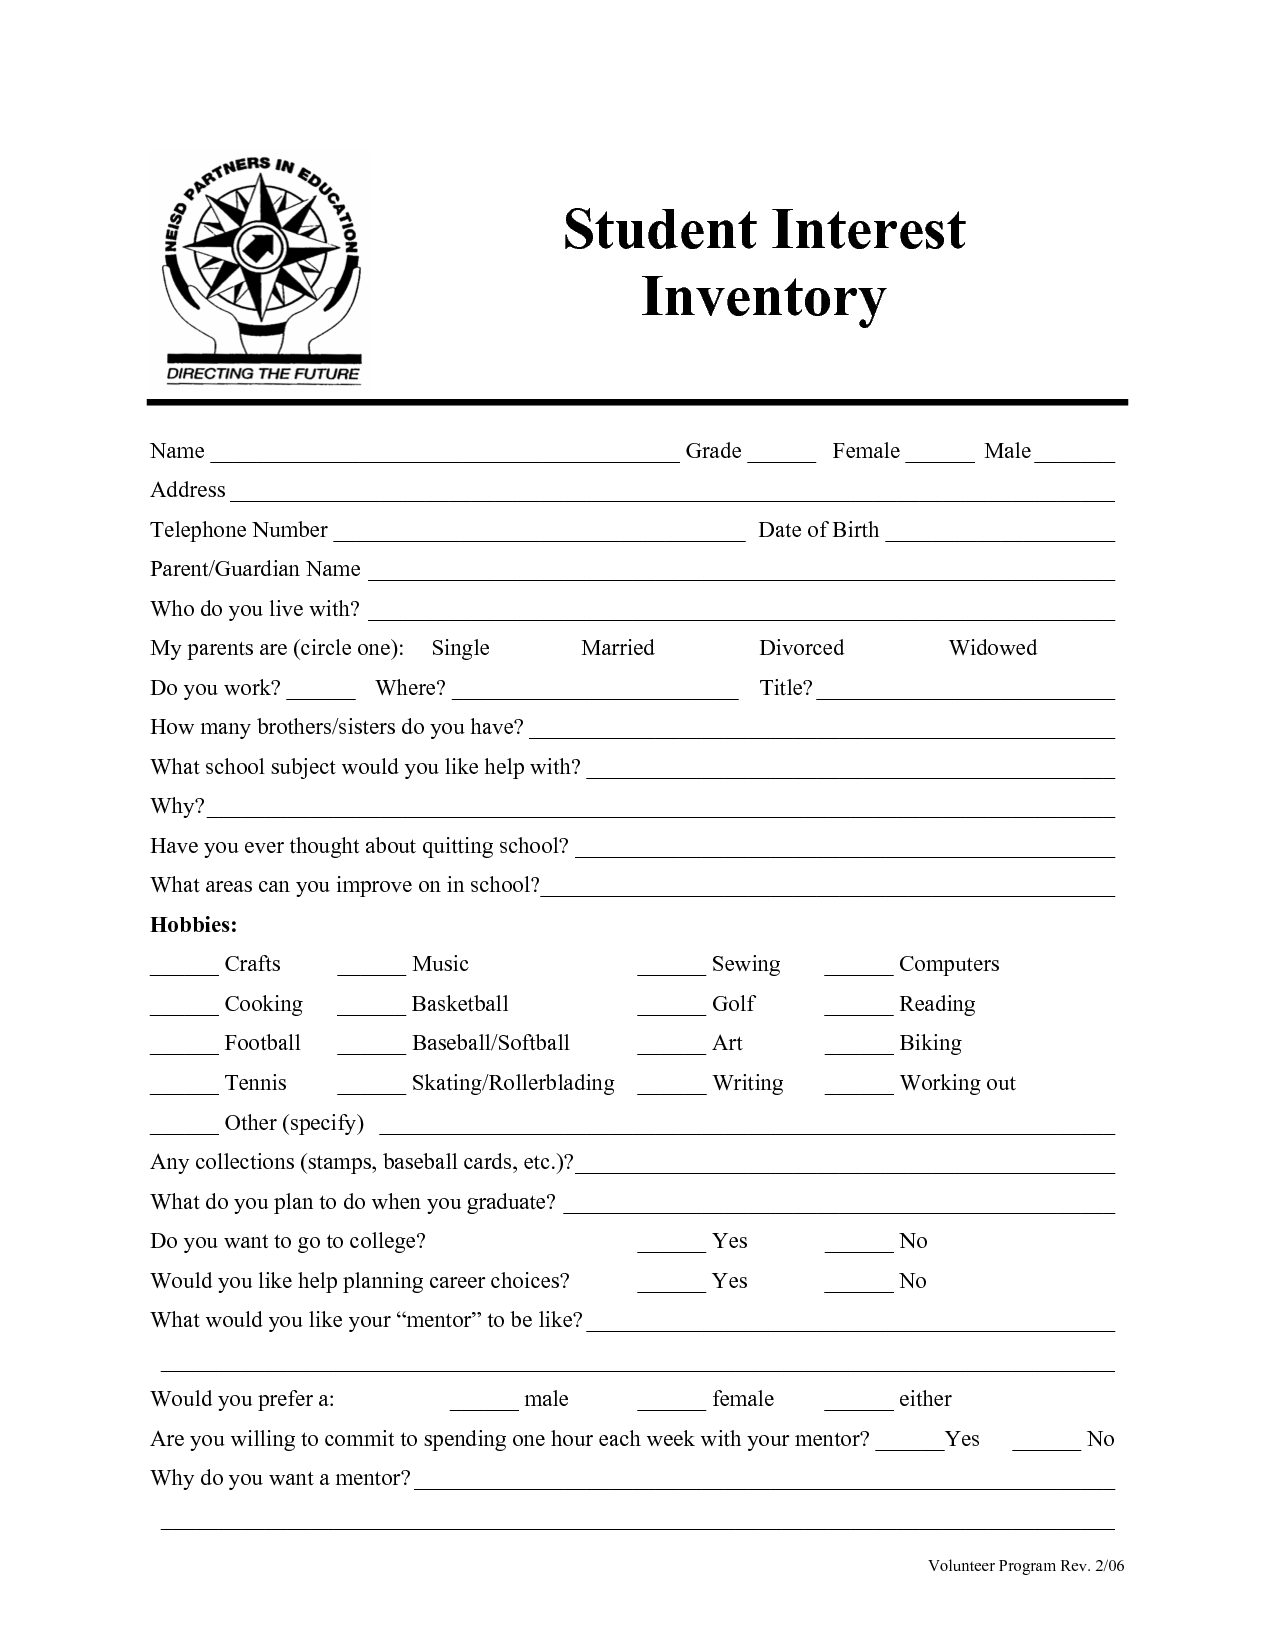 Interest Inventory For Students Printable 92 Images In Collection 